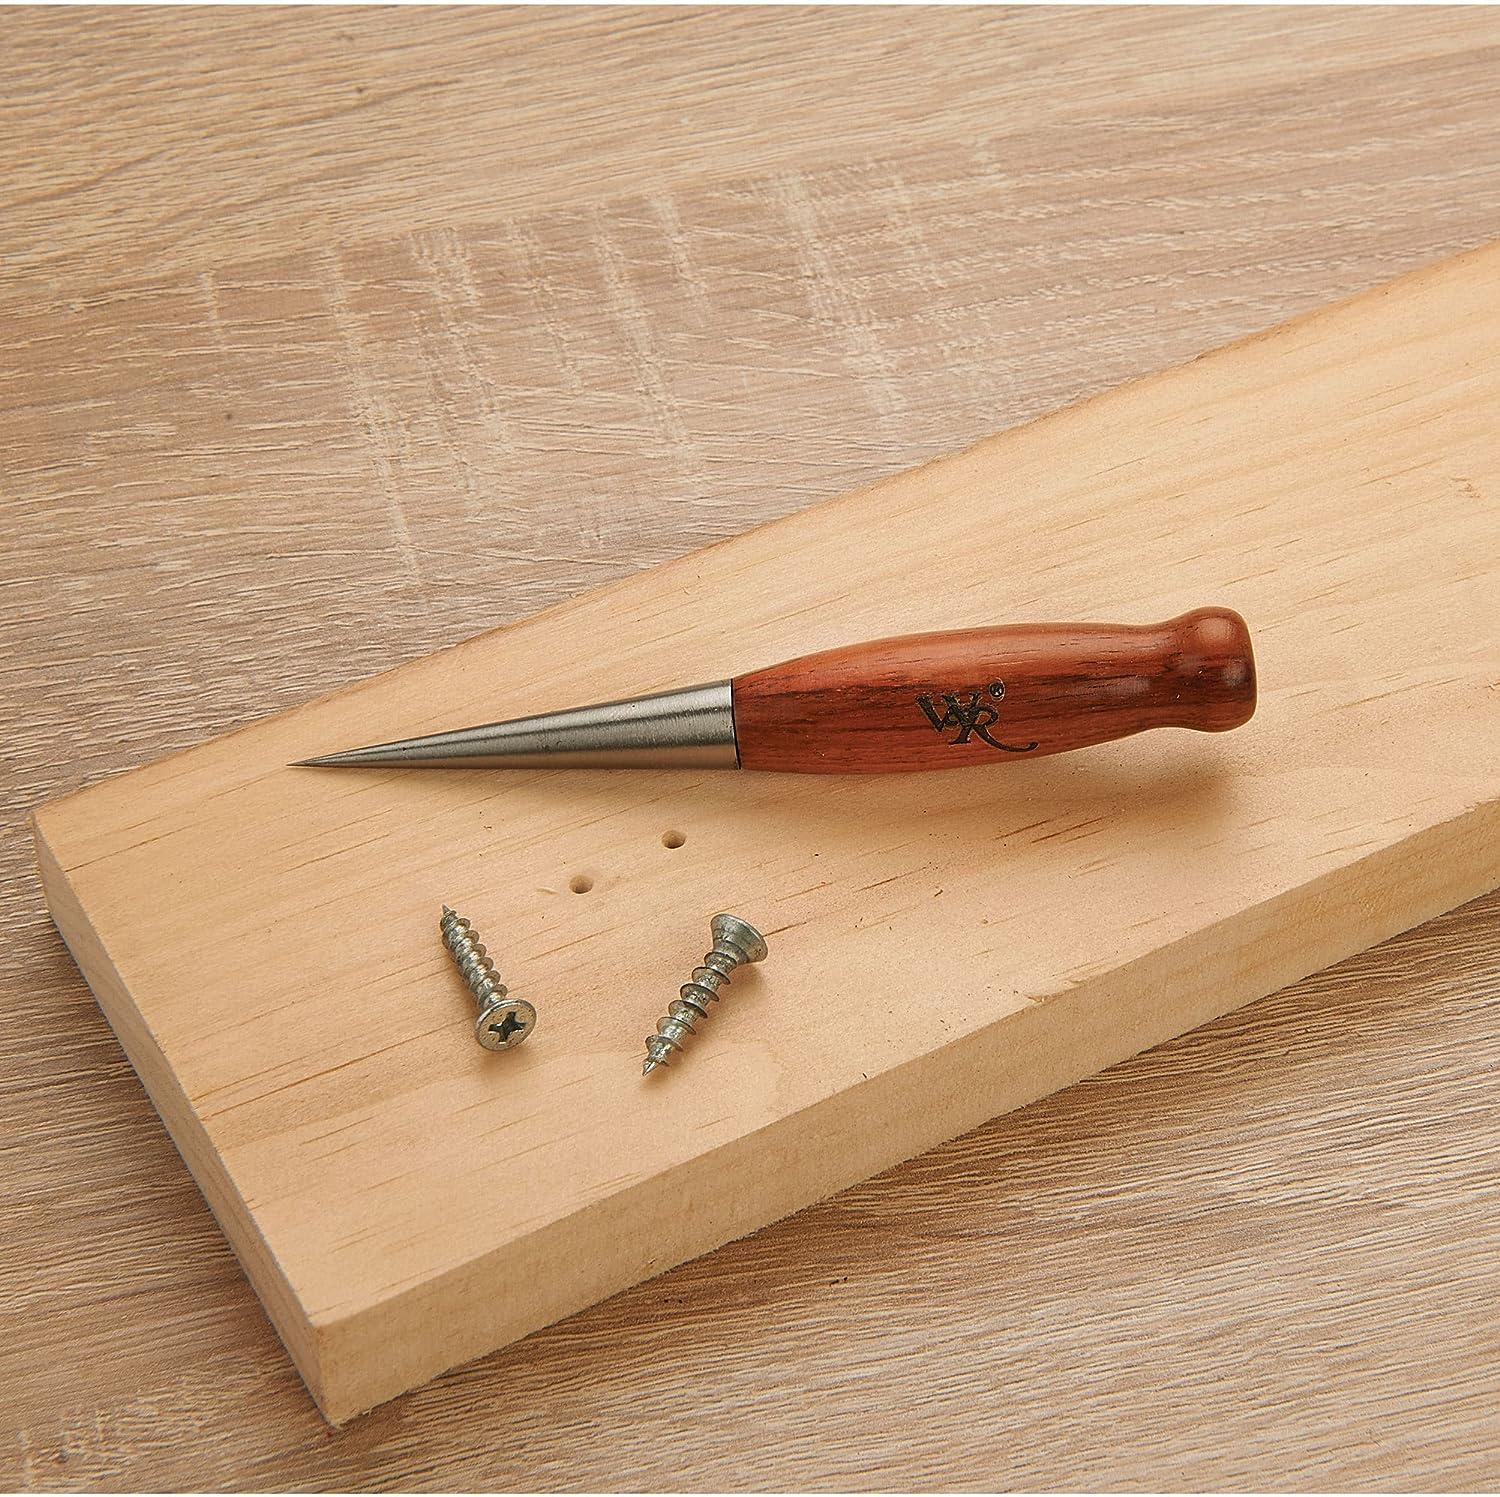 WoodRiver - Detail Carving Tool Set - Full Size - 8 Piece